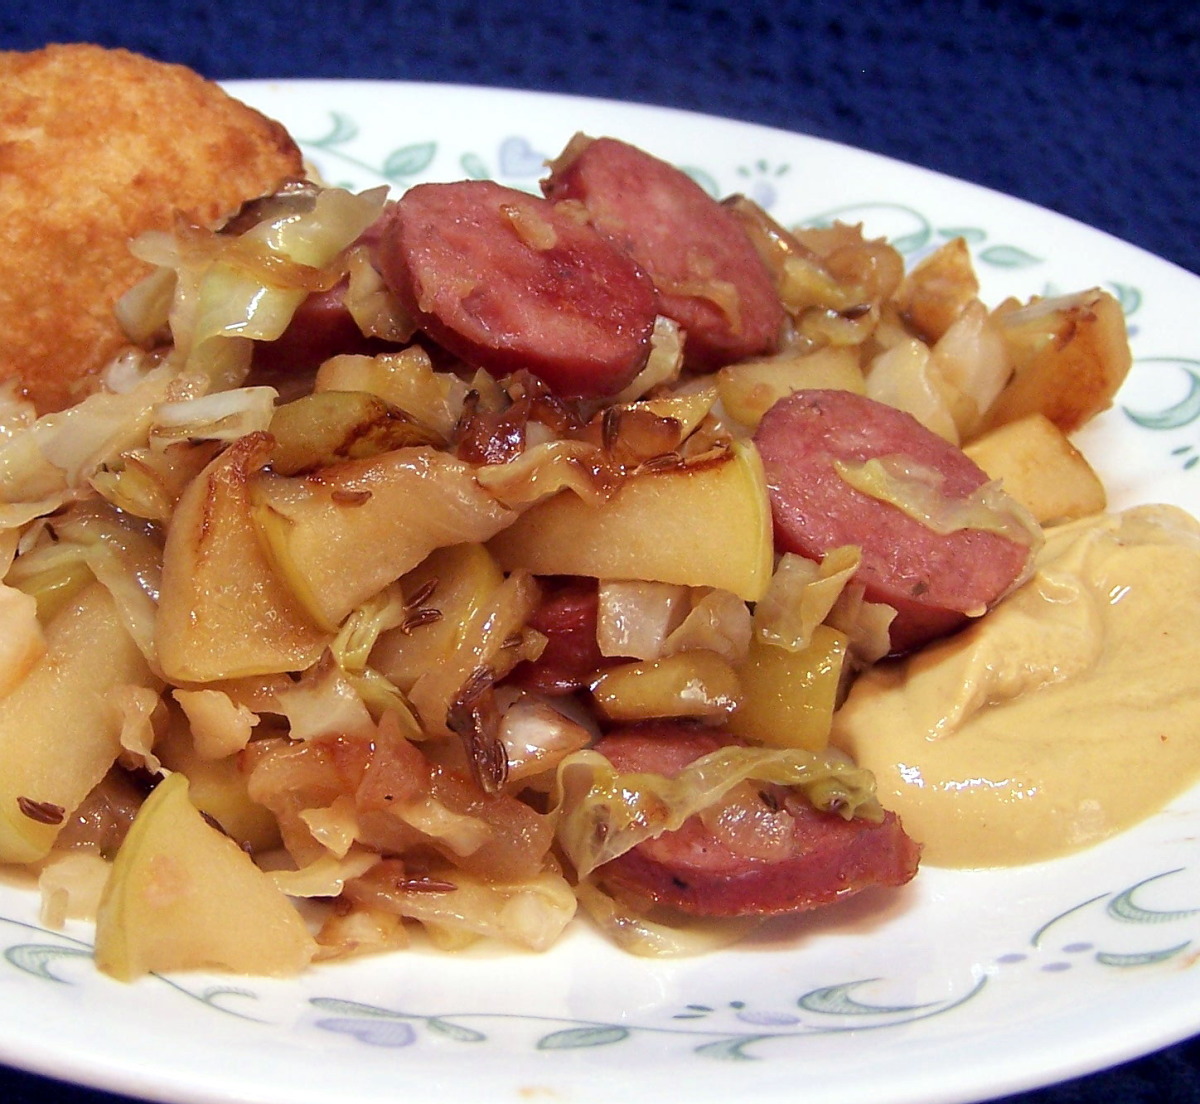 Smoked Chicken Sausage With Apples & Cabbage_image